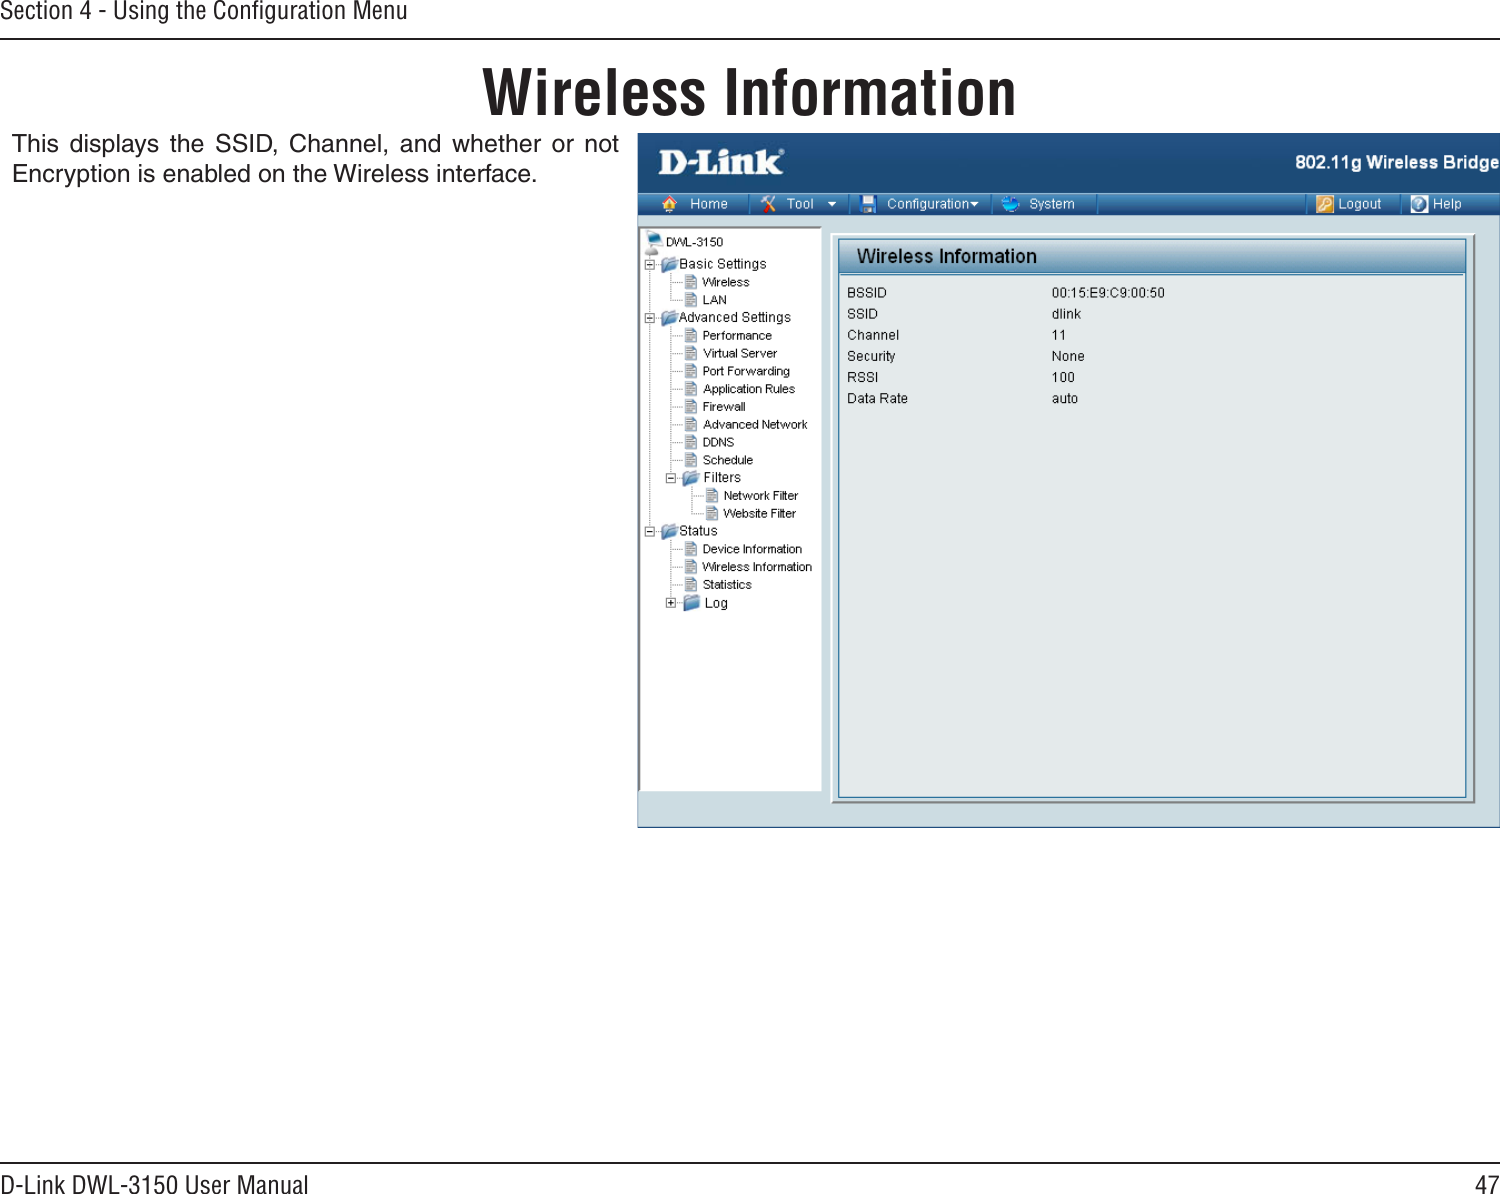 47D-Link DWL-3150 User ManualSection 4 - Using the Conﬁguration MenuWireless InformationThis  displays  the  SSID,  Channel,  and  whether  or  not Encryption is enabled on the Wireless interface.